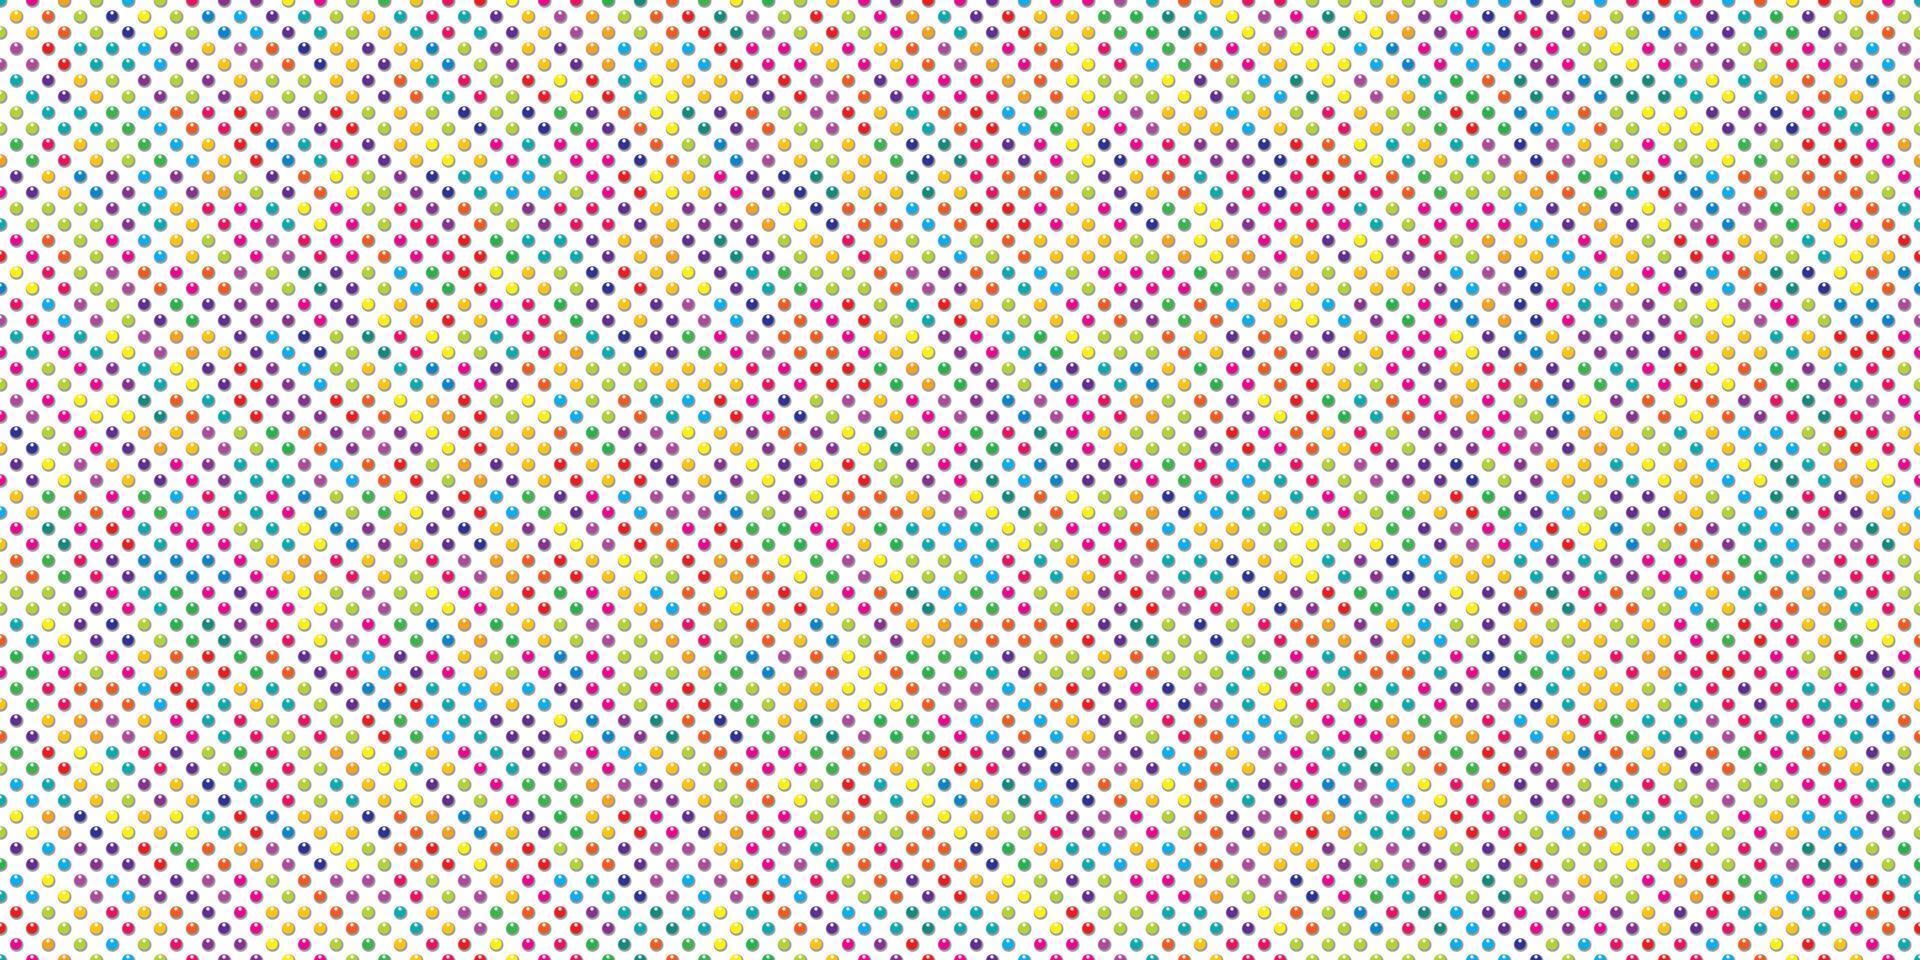 Colorful Hand drawn dots abstract background vector